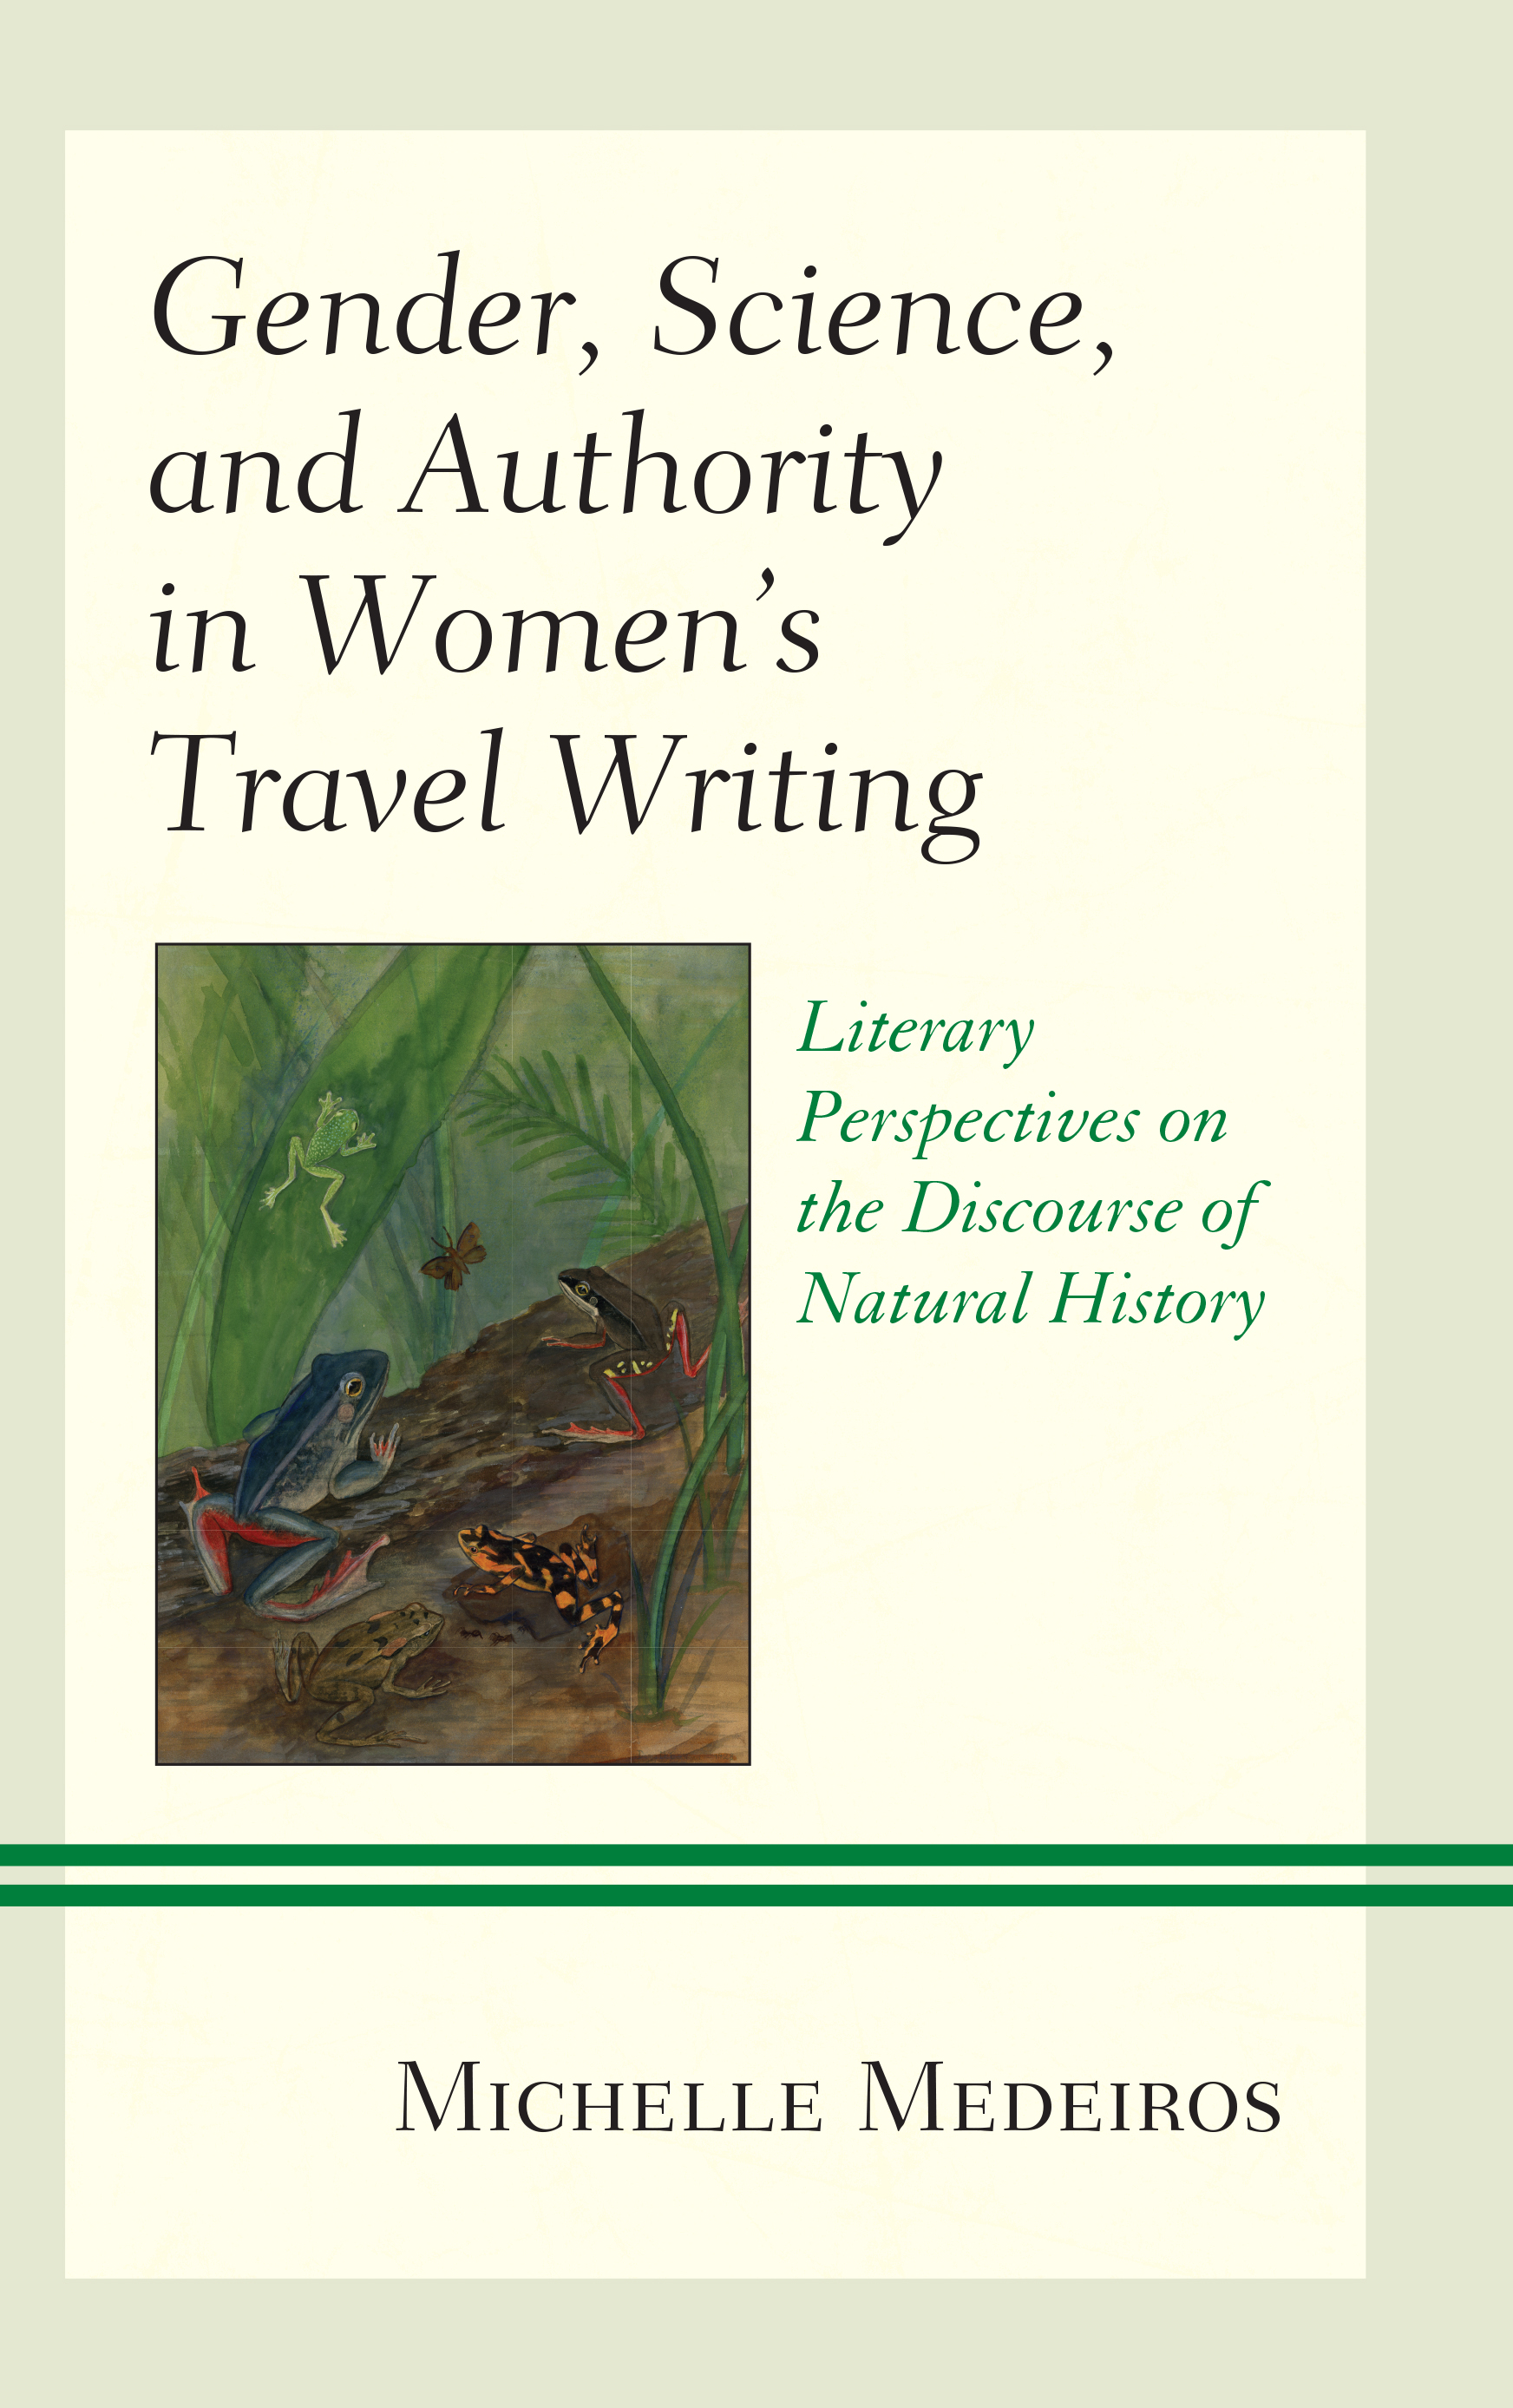 Gender, Science, and Authority in Women’s Travel Writing: Literary Perspectives on the Discourse of Natural History